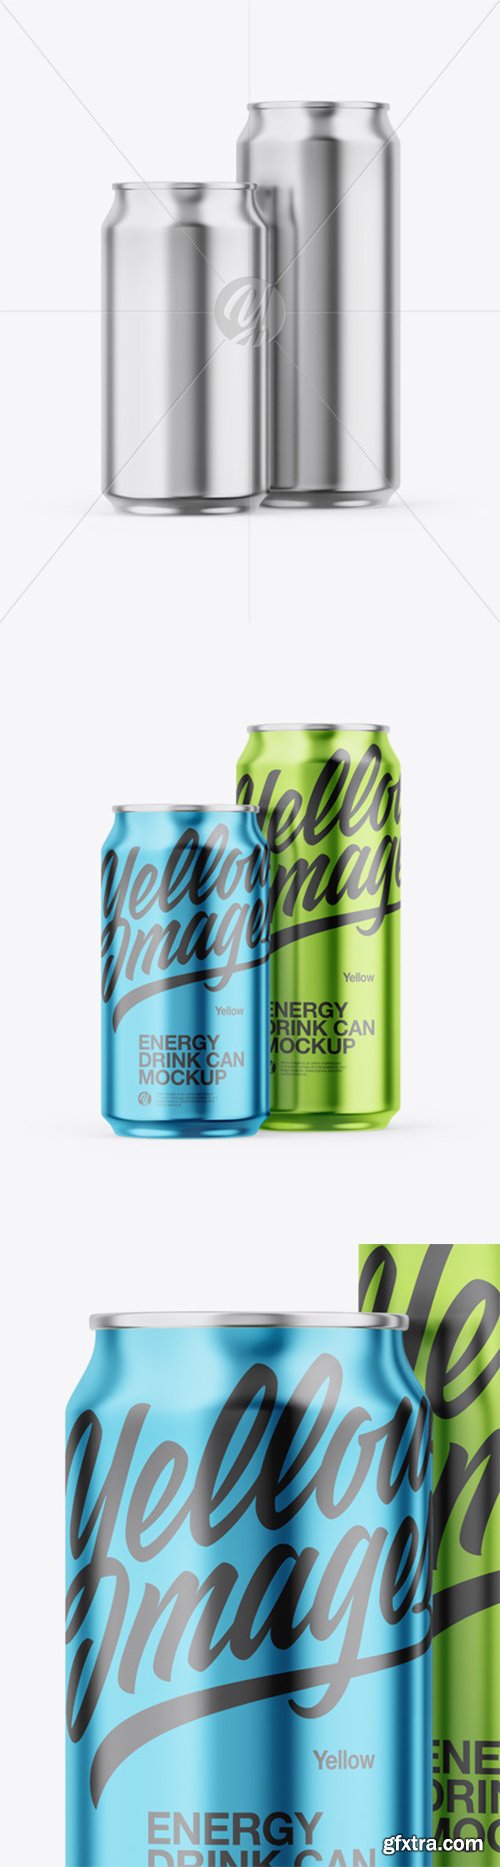 Two Glossy Metallic Cans Mockup 55197